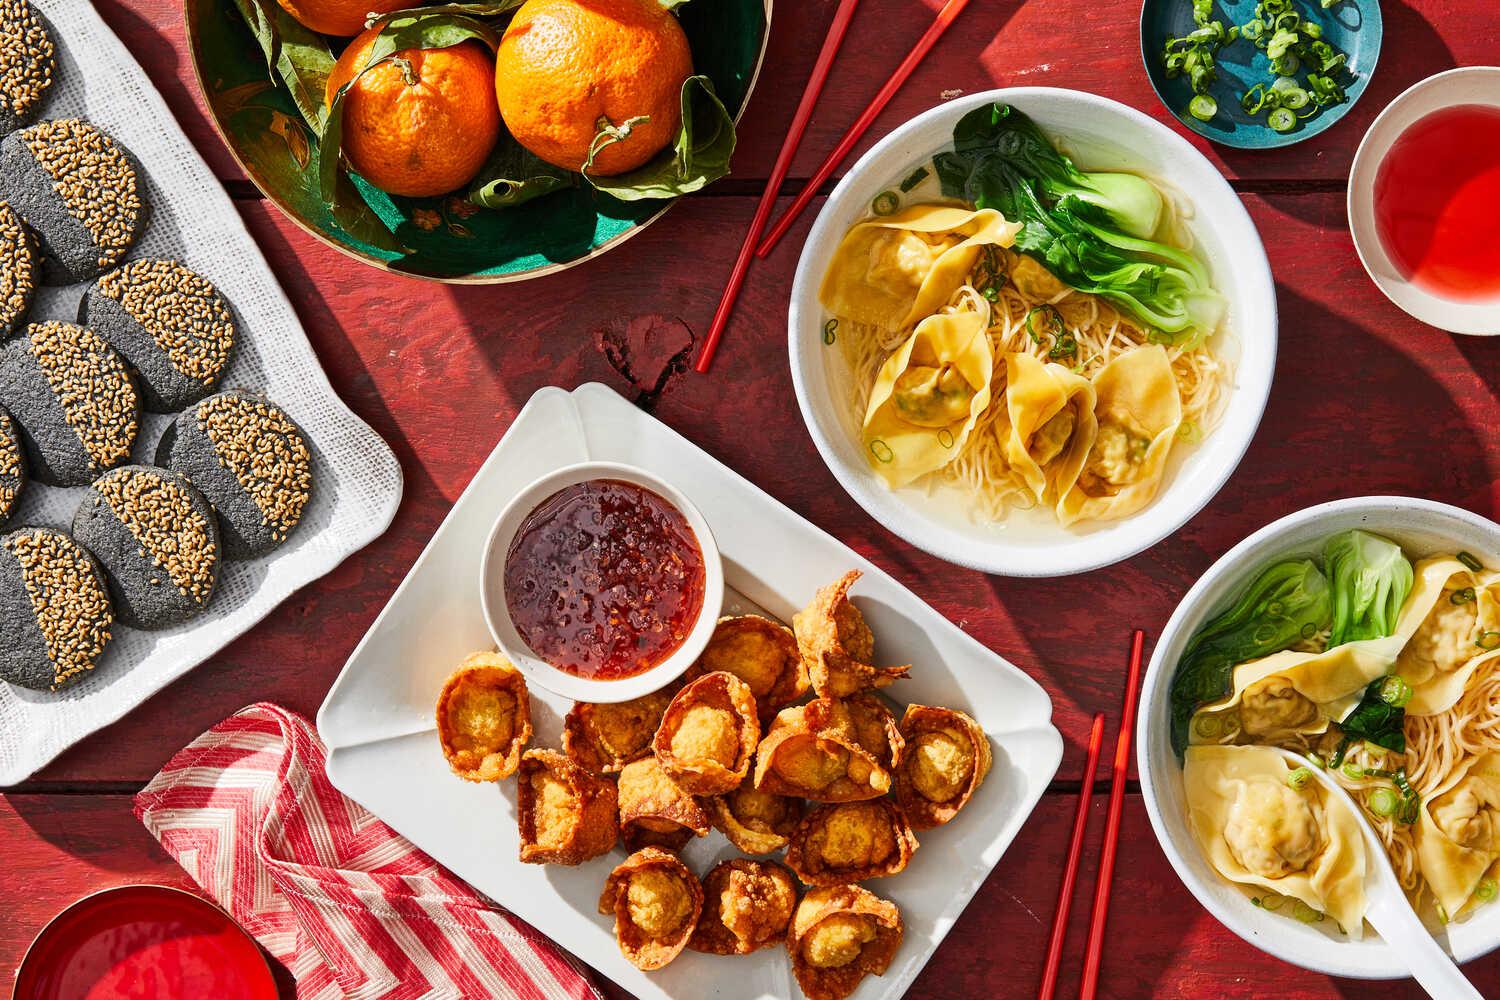 A Chinese New Year spread of food including black sesame cookies on a white platter, mandarin oranges in a bowl, fried wontons with dipping sauce on a plate and two bowls of wonton noodle soup.